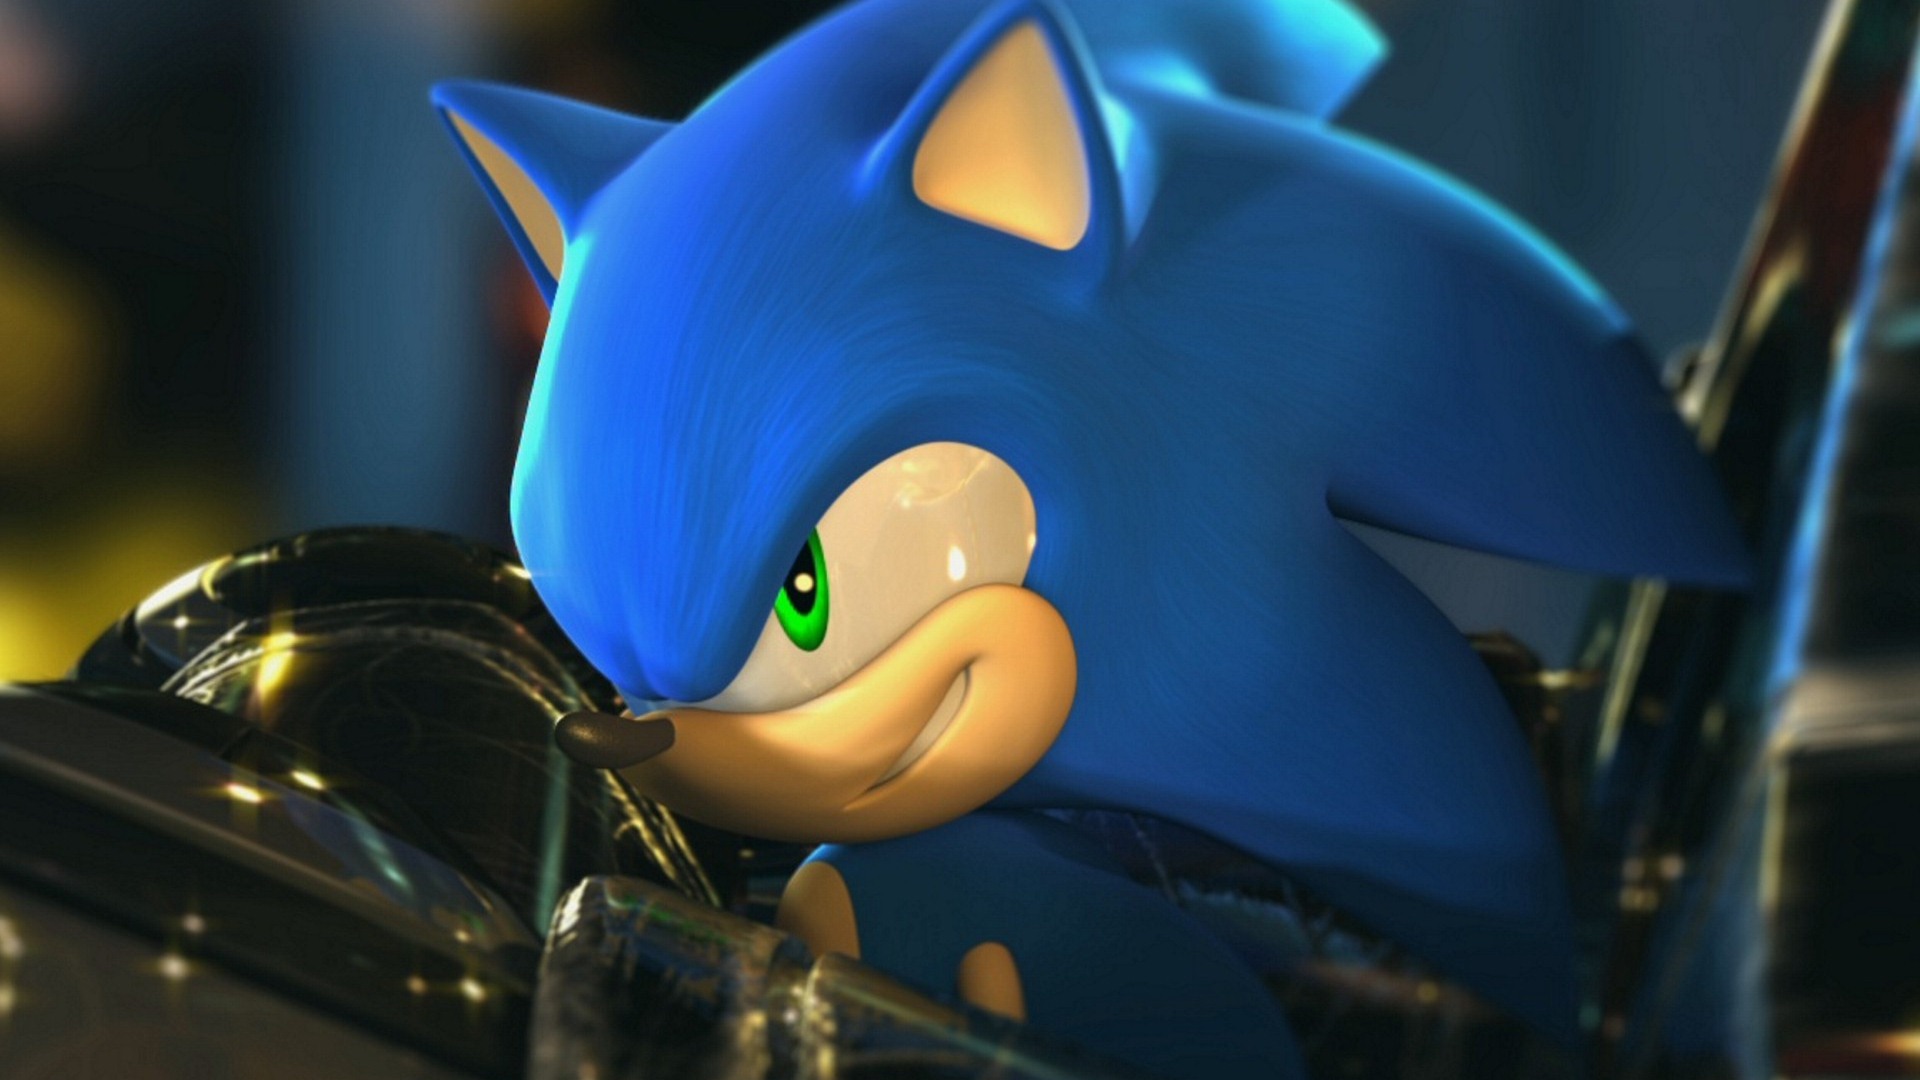 Sonic HD wallpapers #8 - 1920x1080